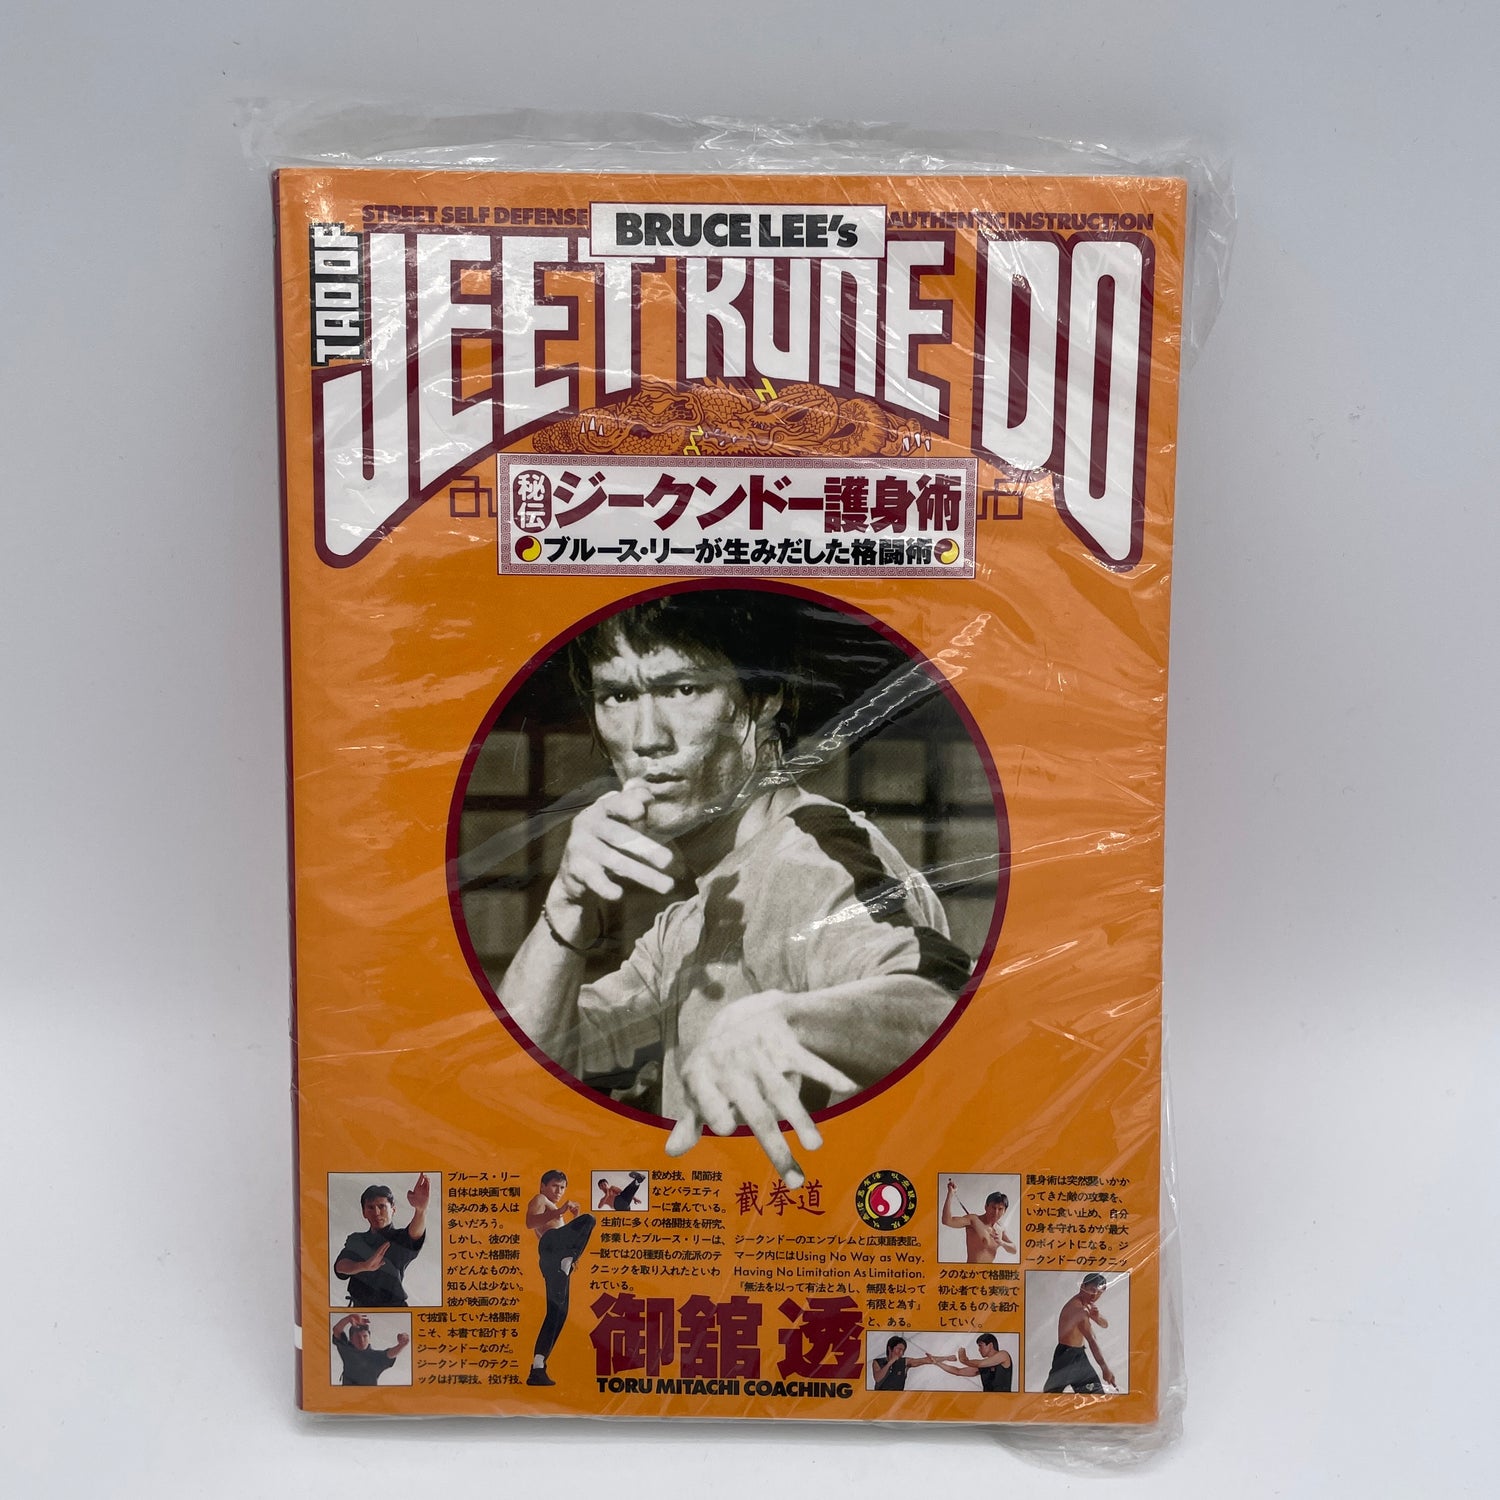 Tao of Bruce Lee's Jeet Kune Do Book by Toru Mitachi (Preowned)